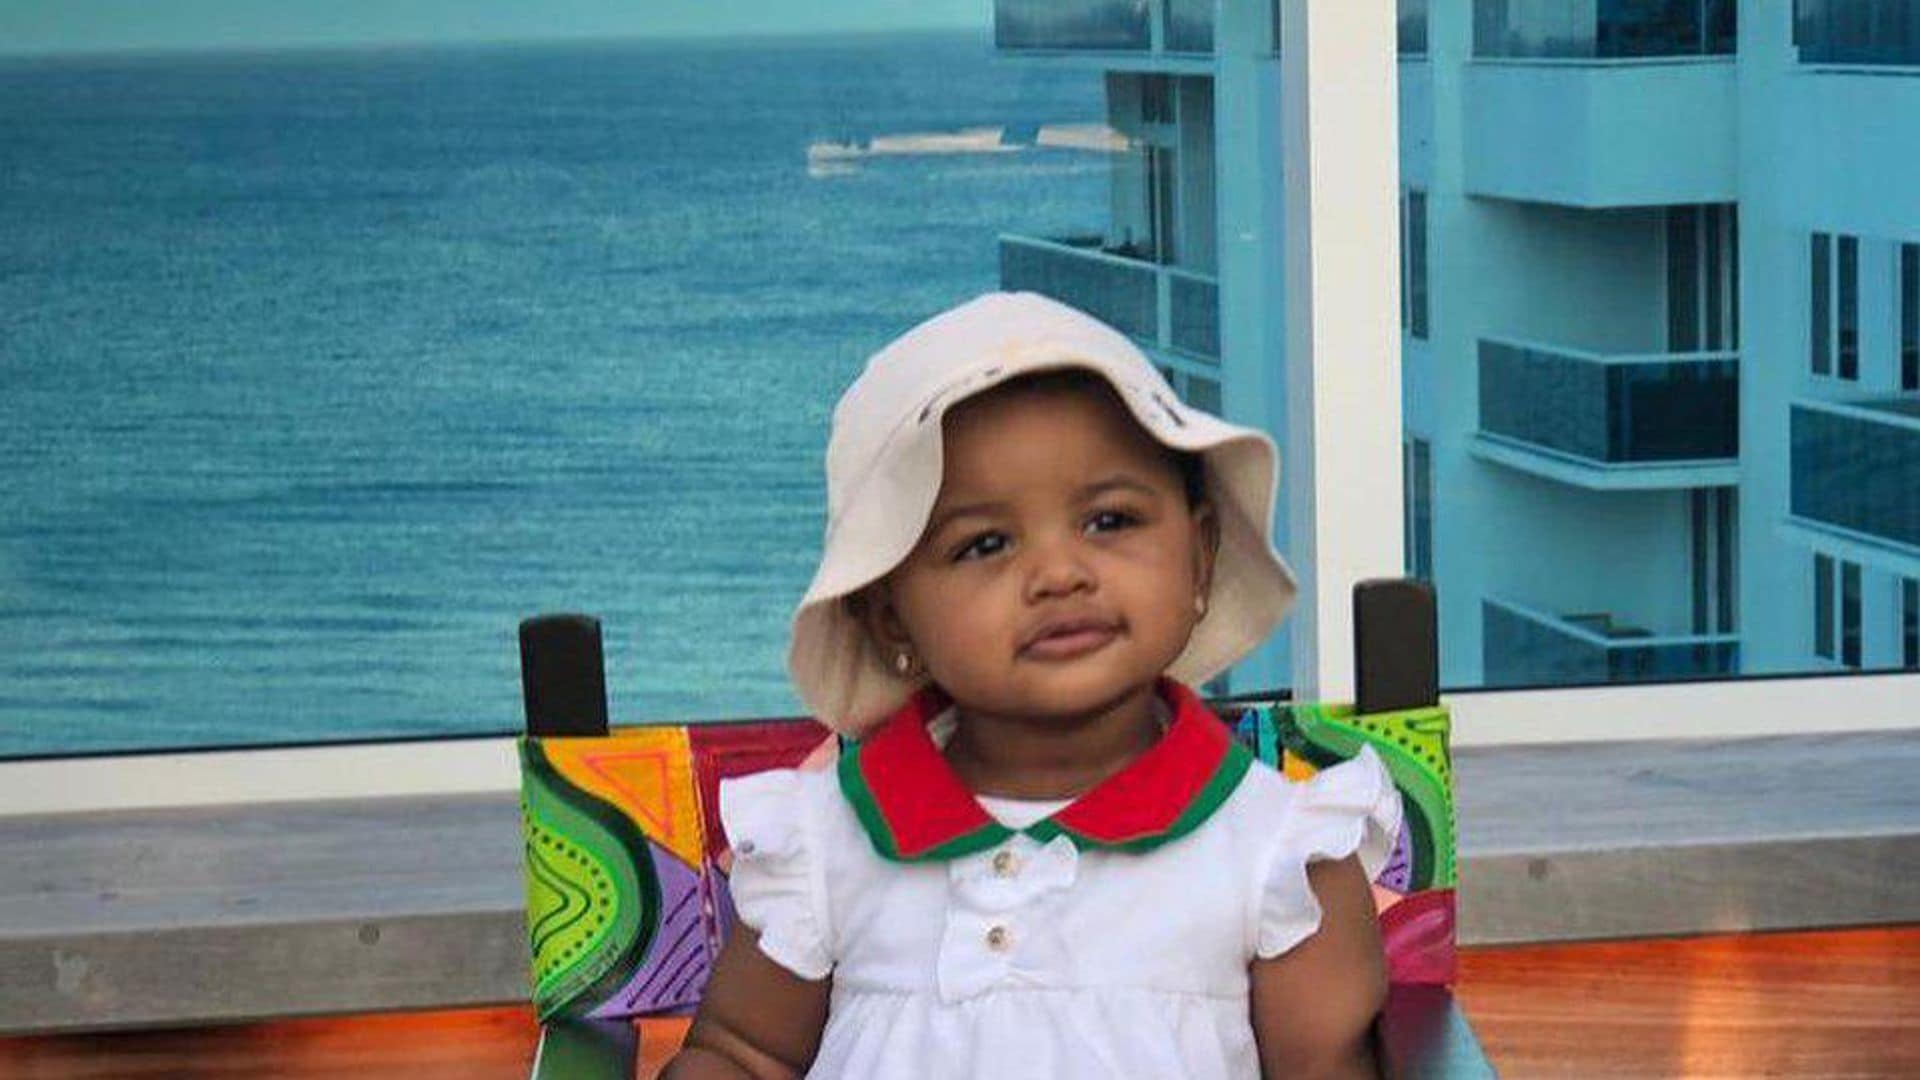 Cardi B’s daughter is a young style queen in the making - see her looks